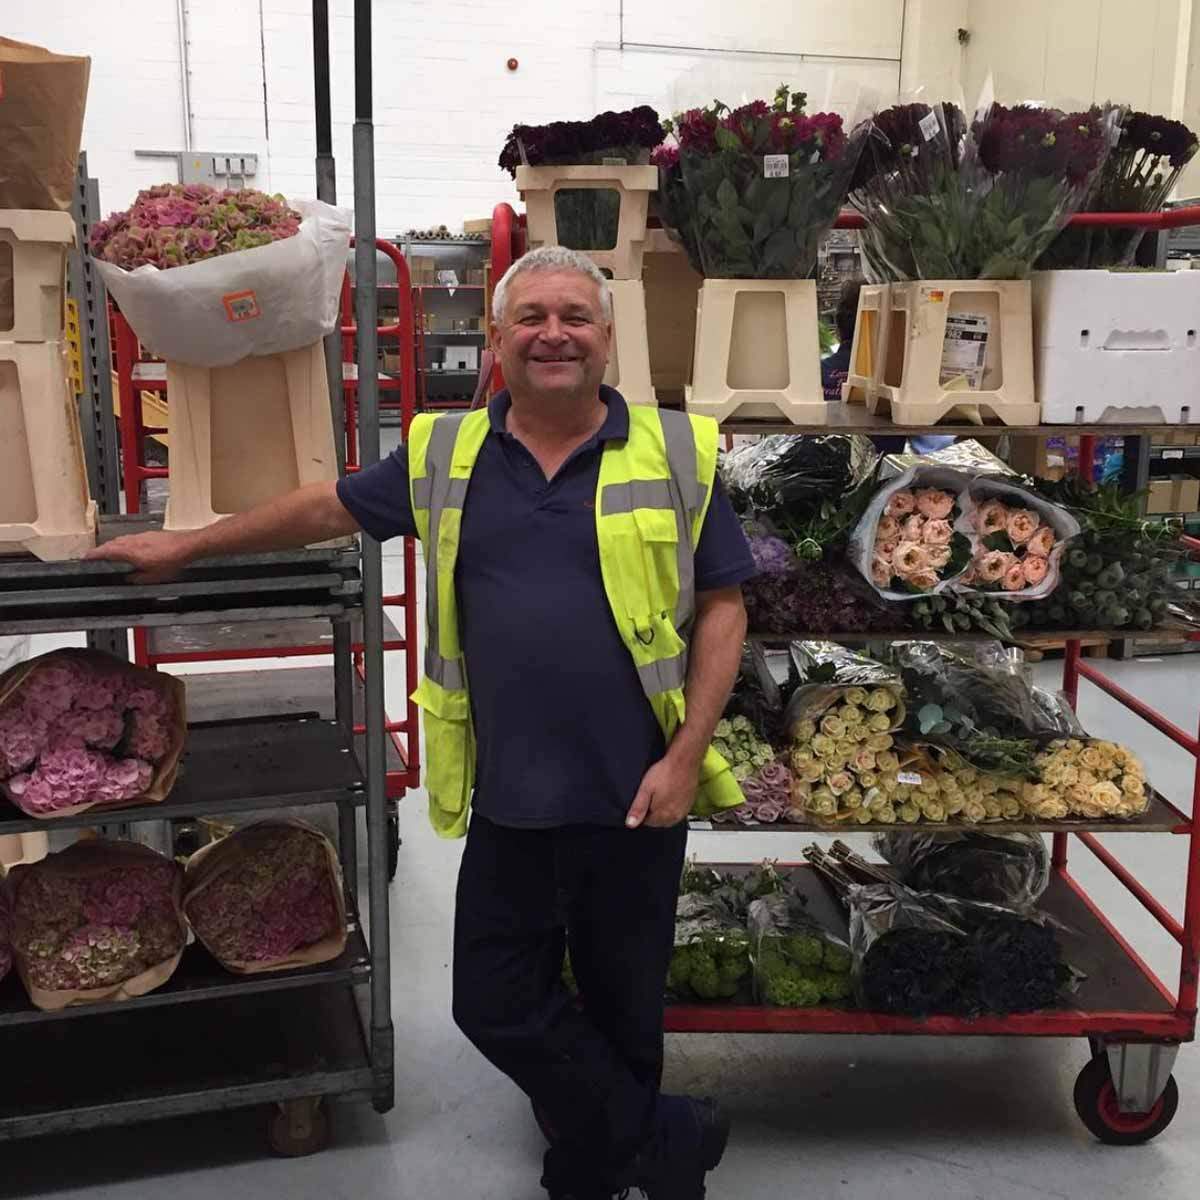 flower-vision-southampton-trader-on-thursd-featured